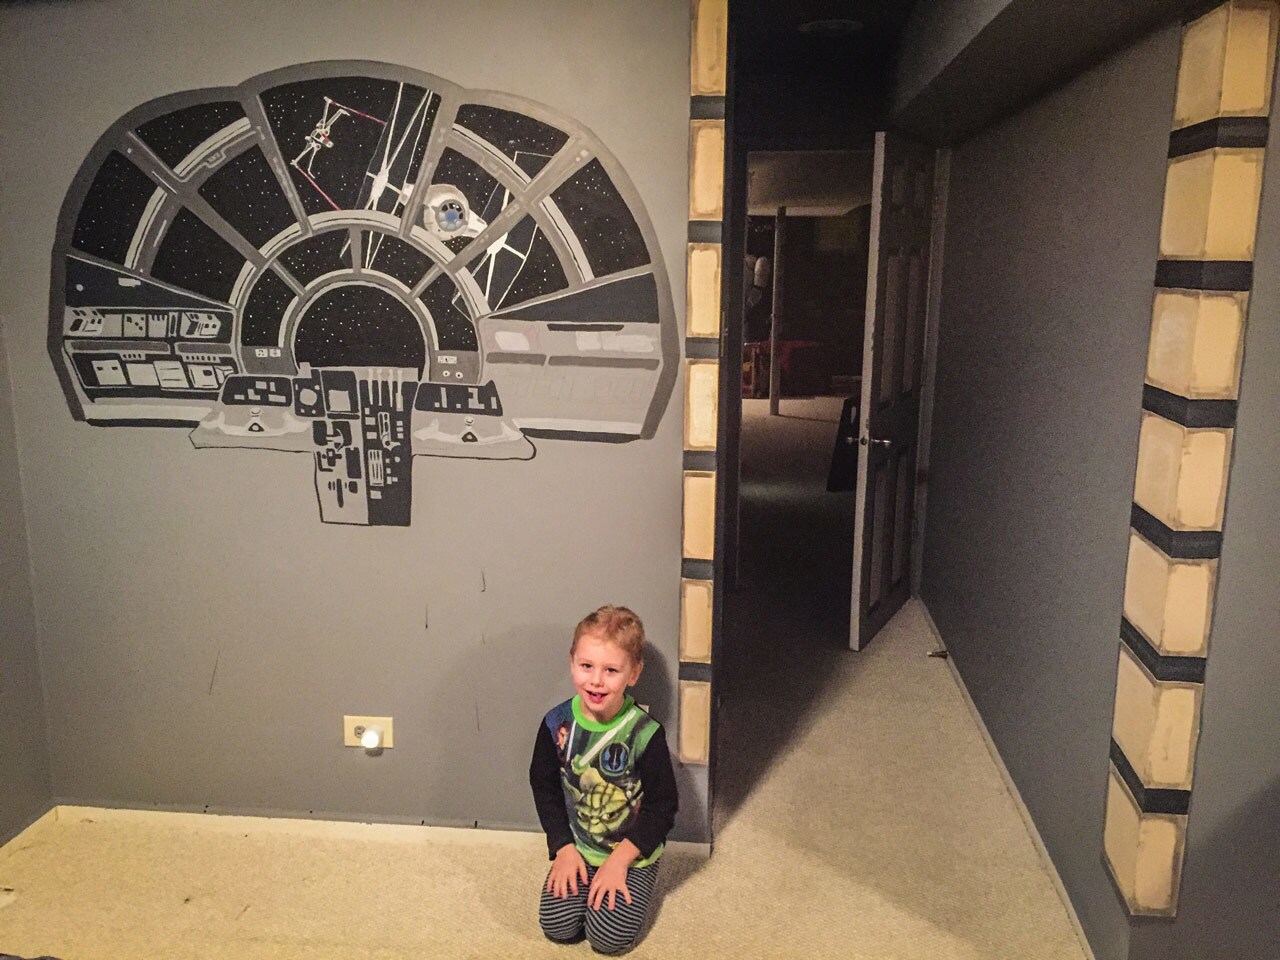 A child kneels next to a wall decal that looks like the view from the Millennium Falcon cockpit.